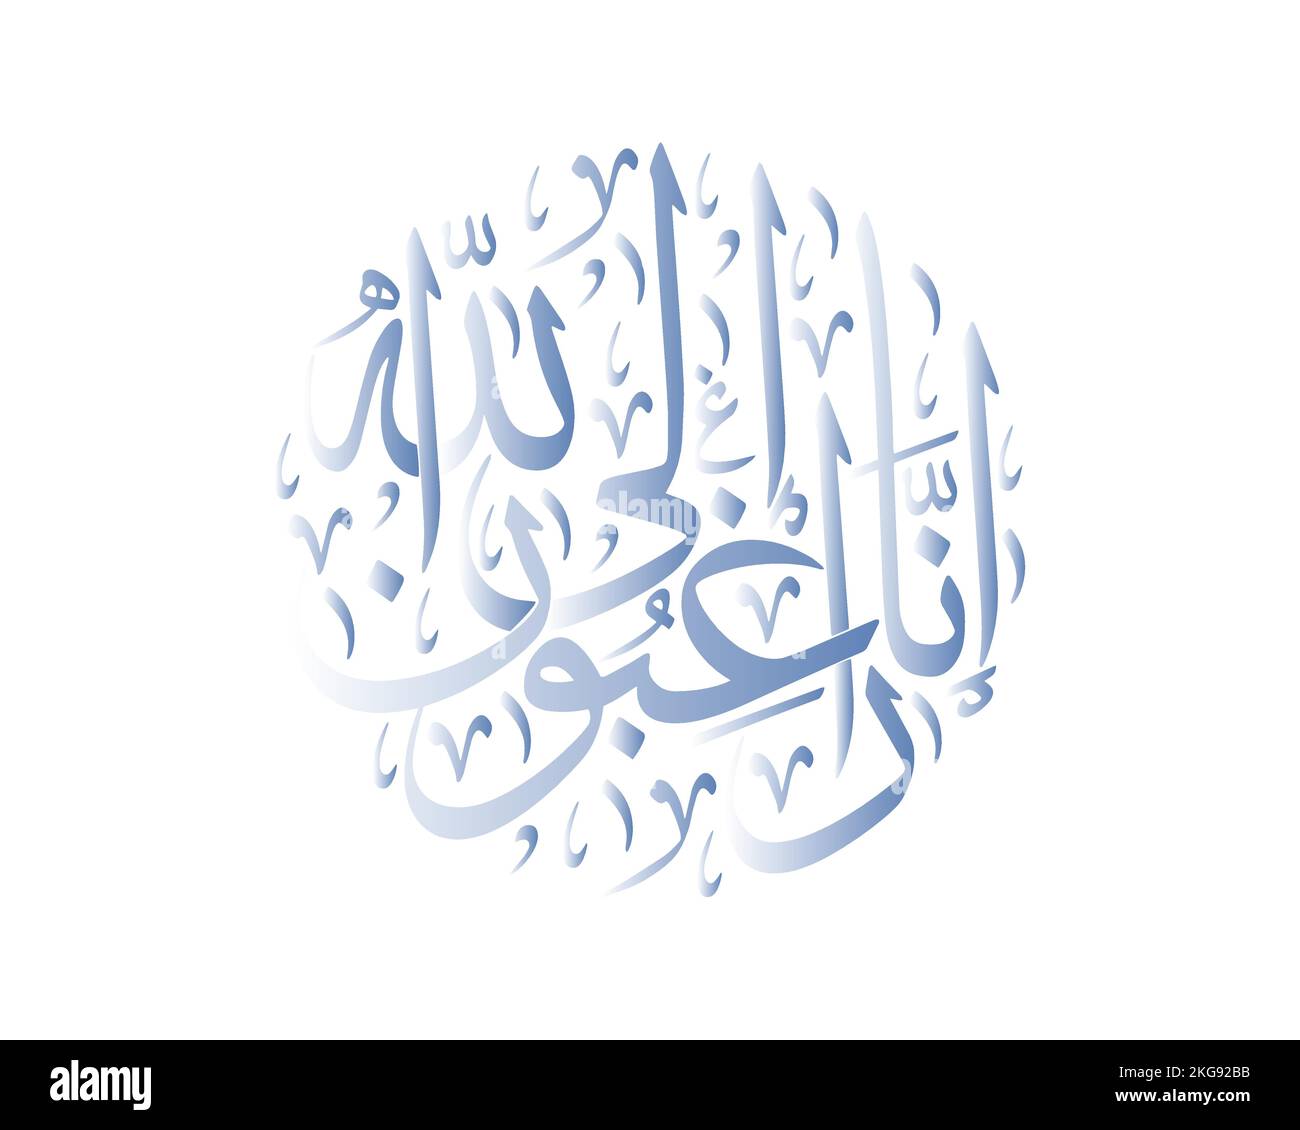 islamic calligraphy quranic verses , TRANSLATE: we are desirous toward Allah [it would have been better for them] Stock Vector